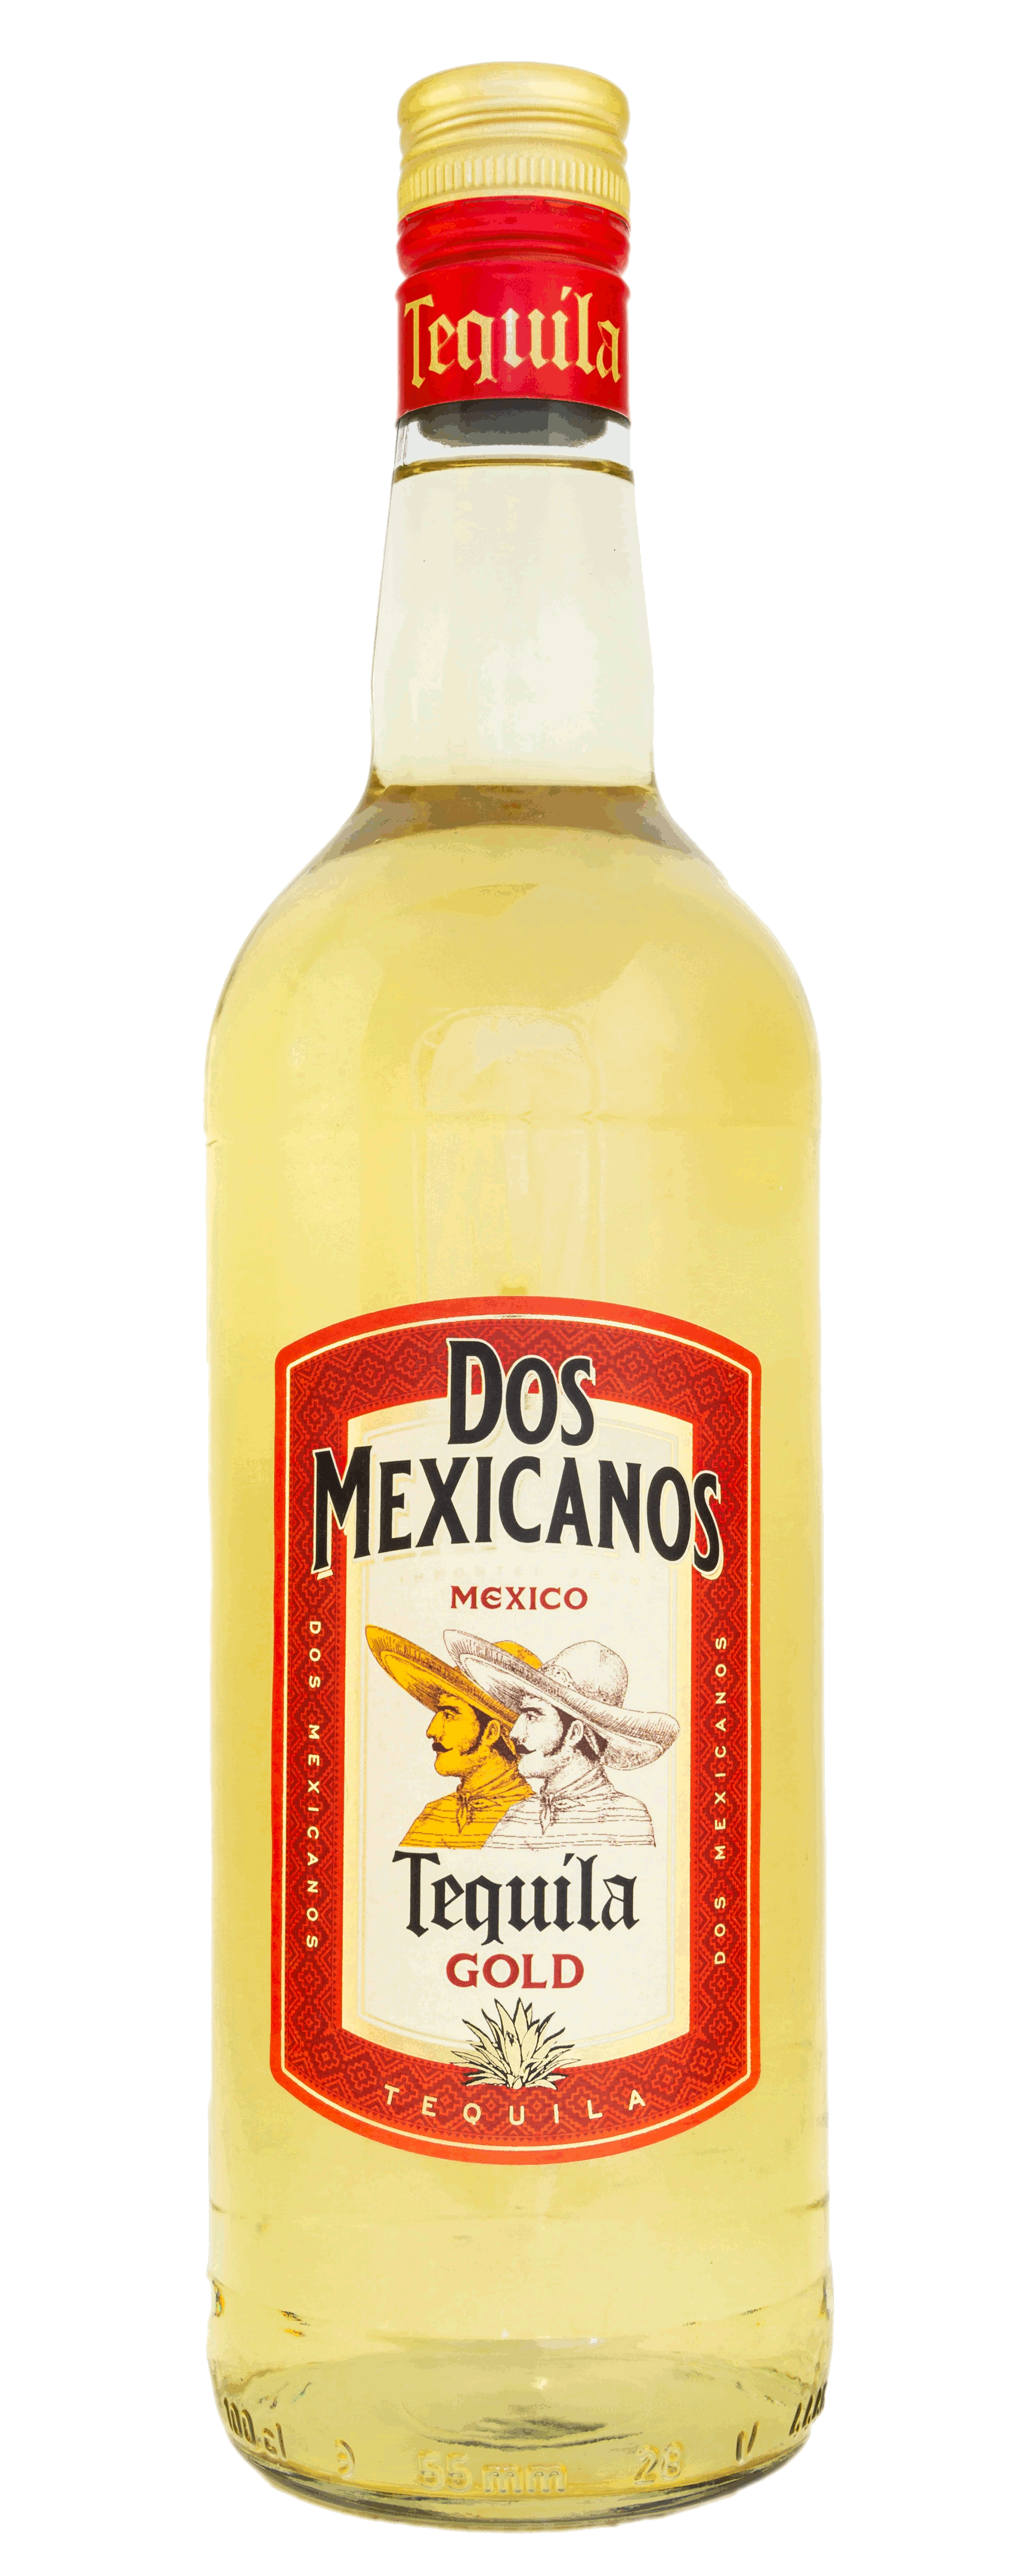 Tequila Dos Mexicanos Gold - 1 Liter